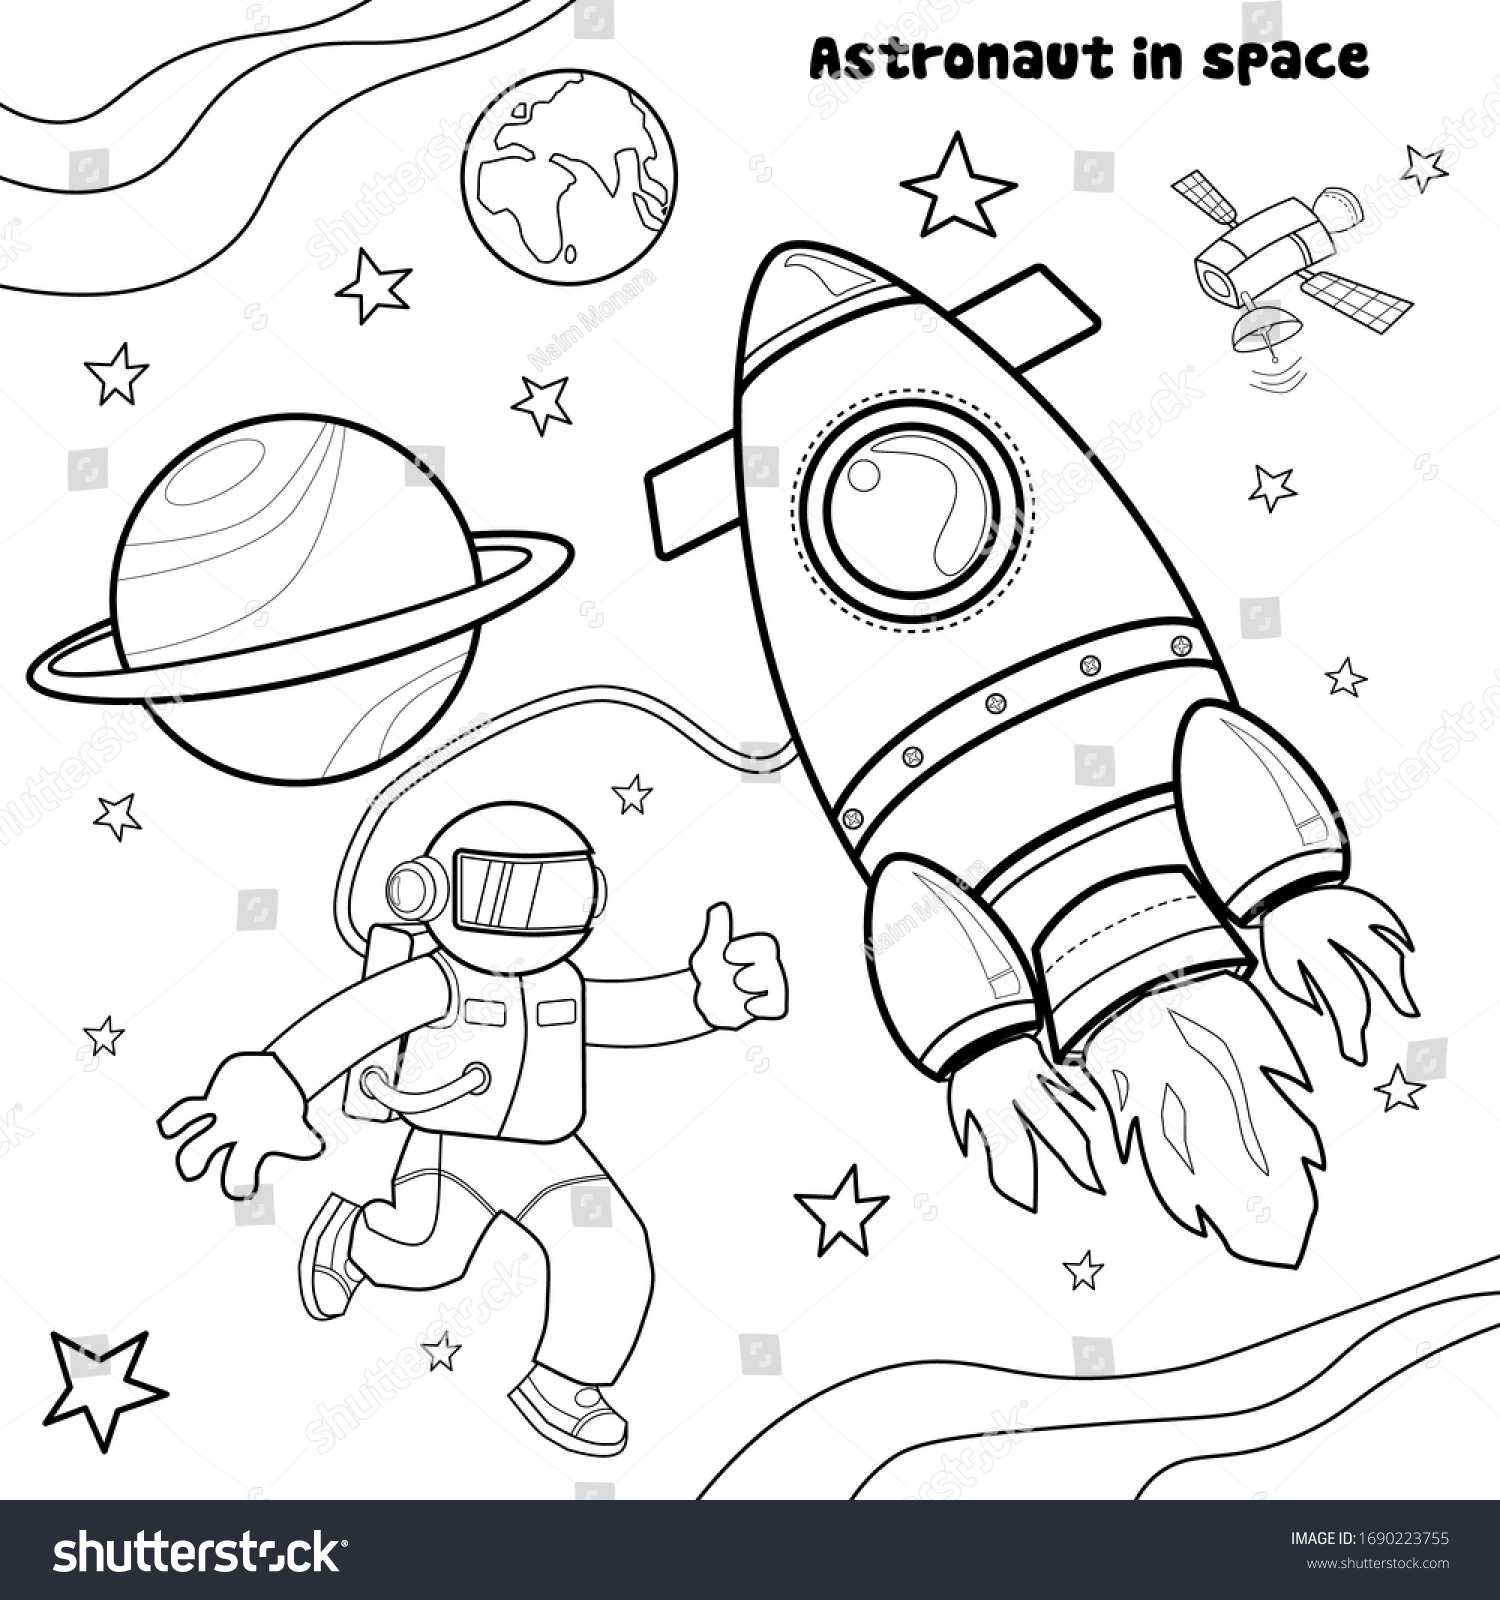 20,20 Astronaut coloring page Images, Stock Photos & Vectors ...